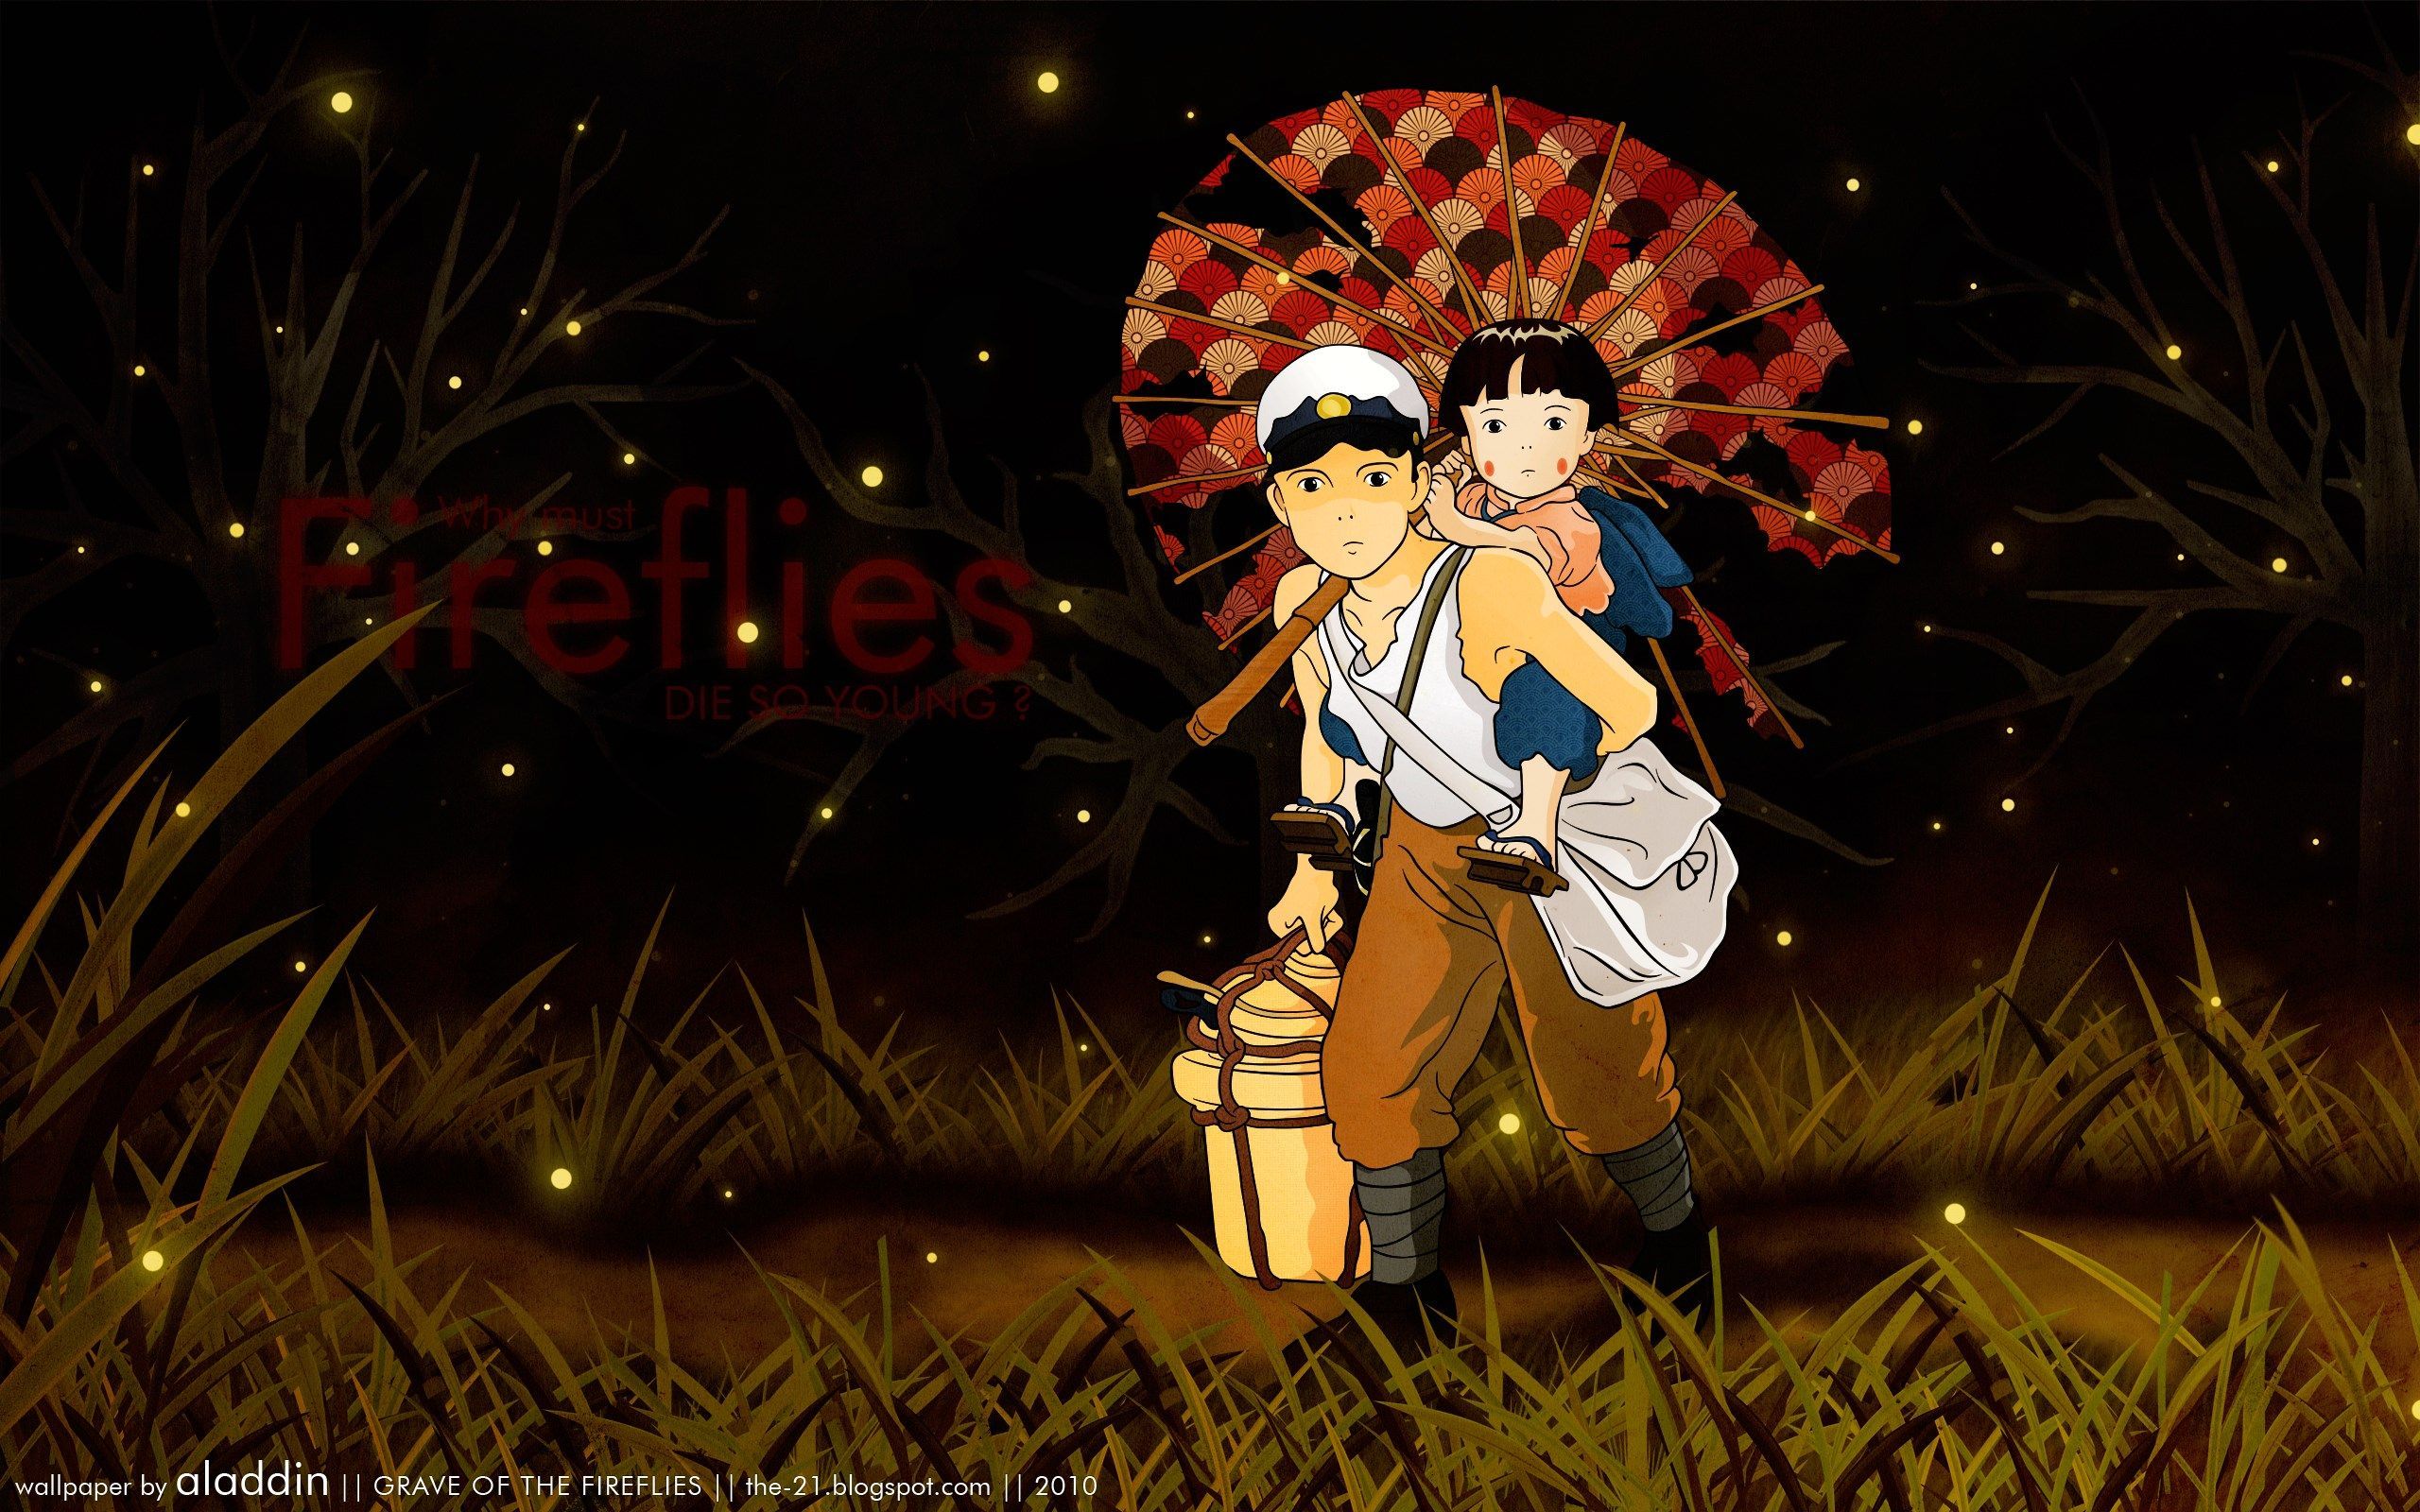 Firefly Wallpaper for Computer. Grave of the fireflies, Japanese animated movies, Anime movies